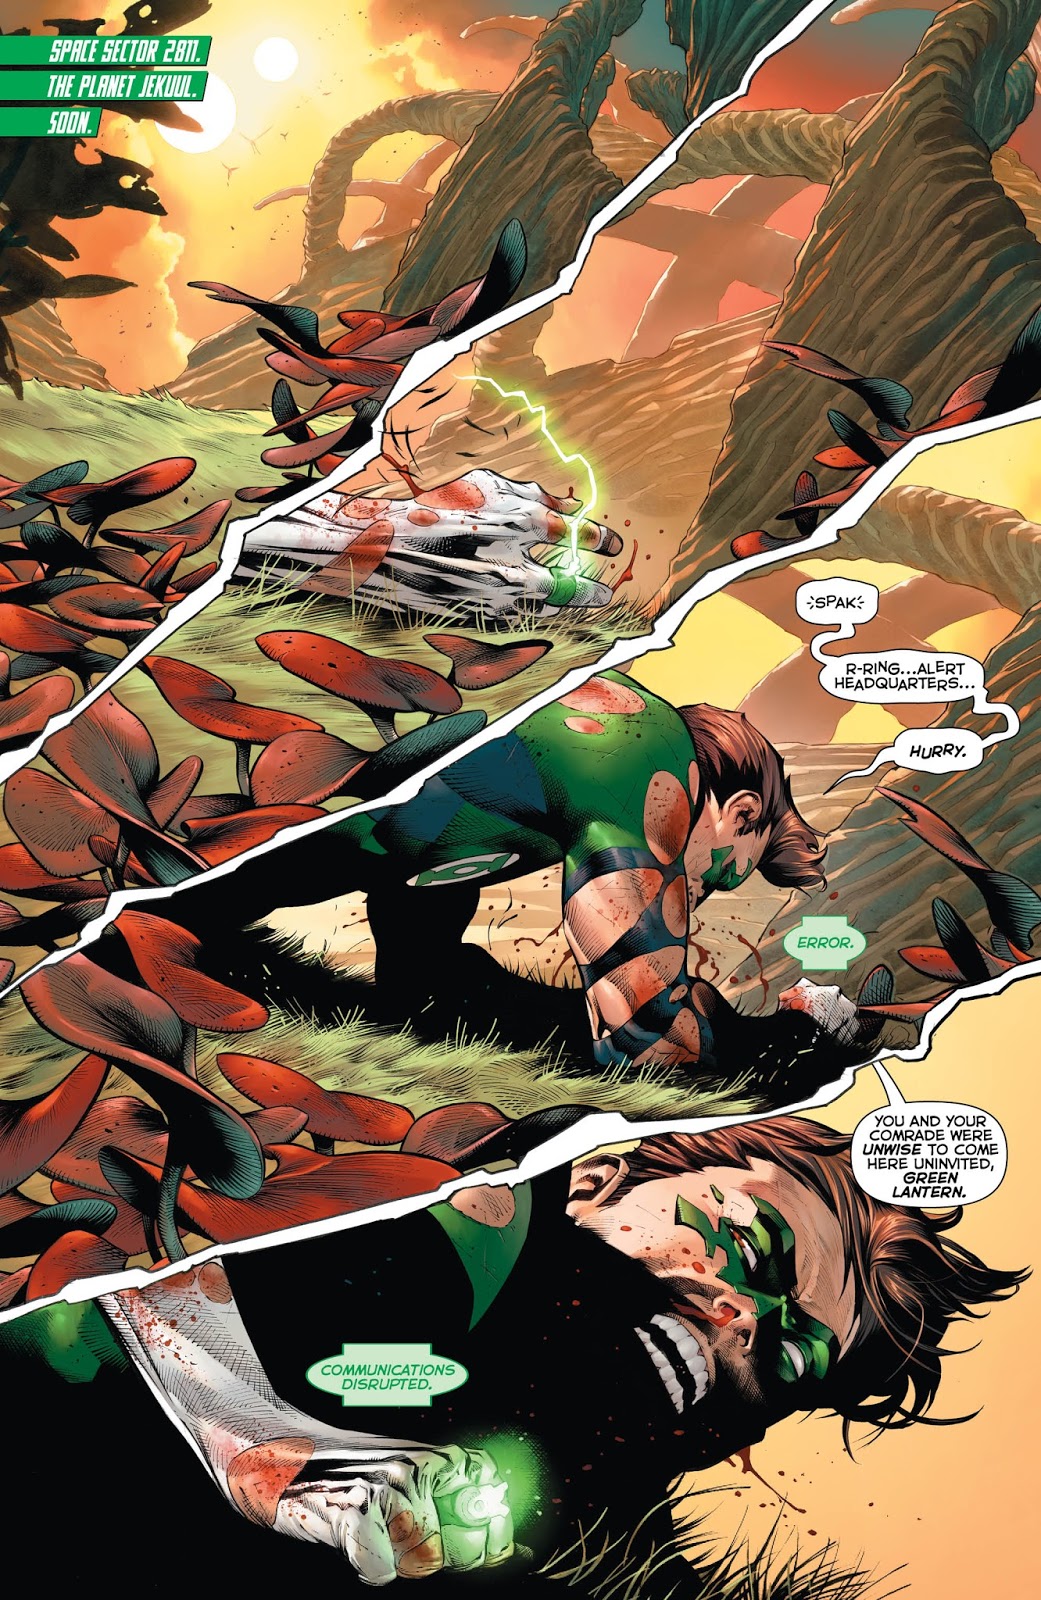 Review - Hal Jordan and the Green Lantern Corps #37: Zod - GeekDad